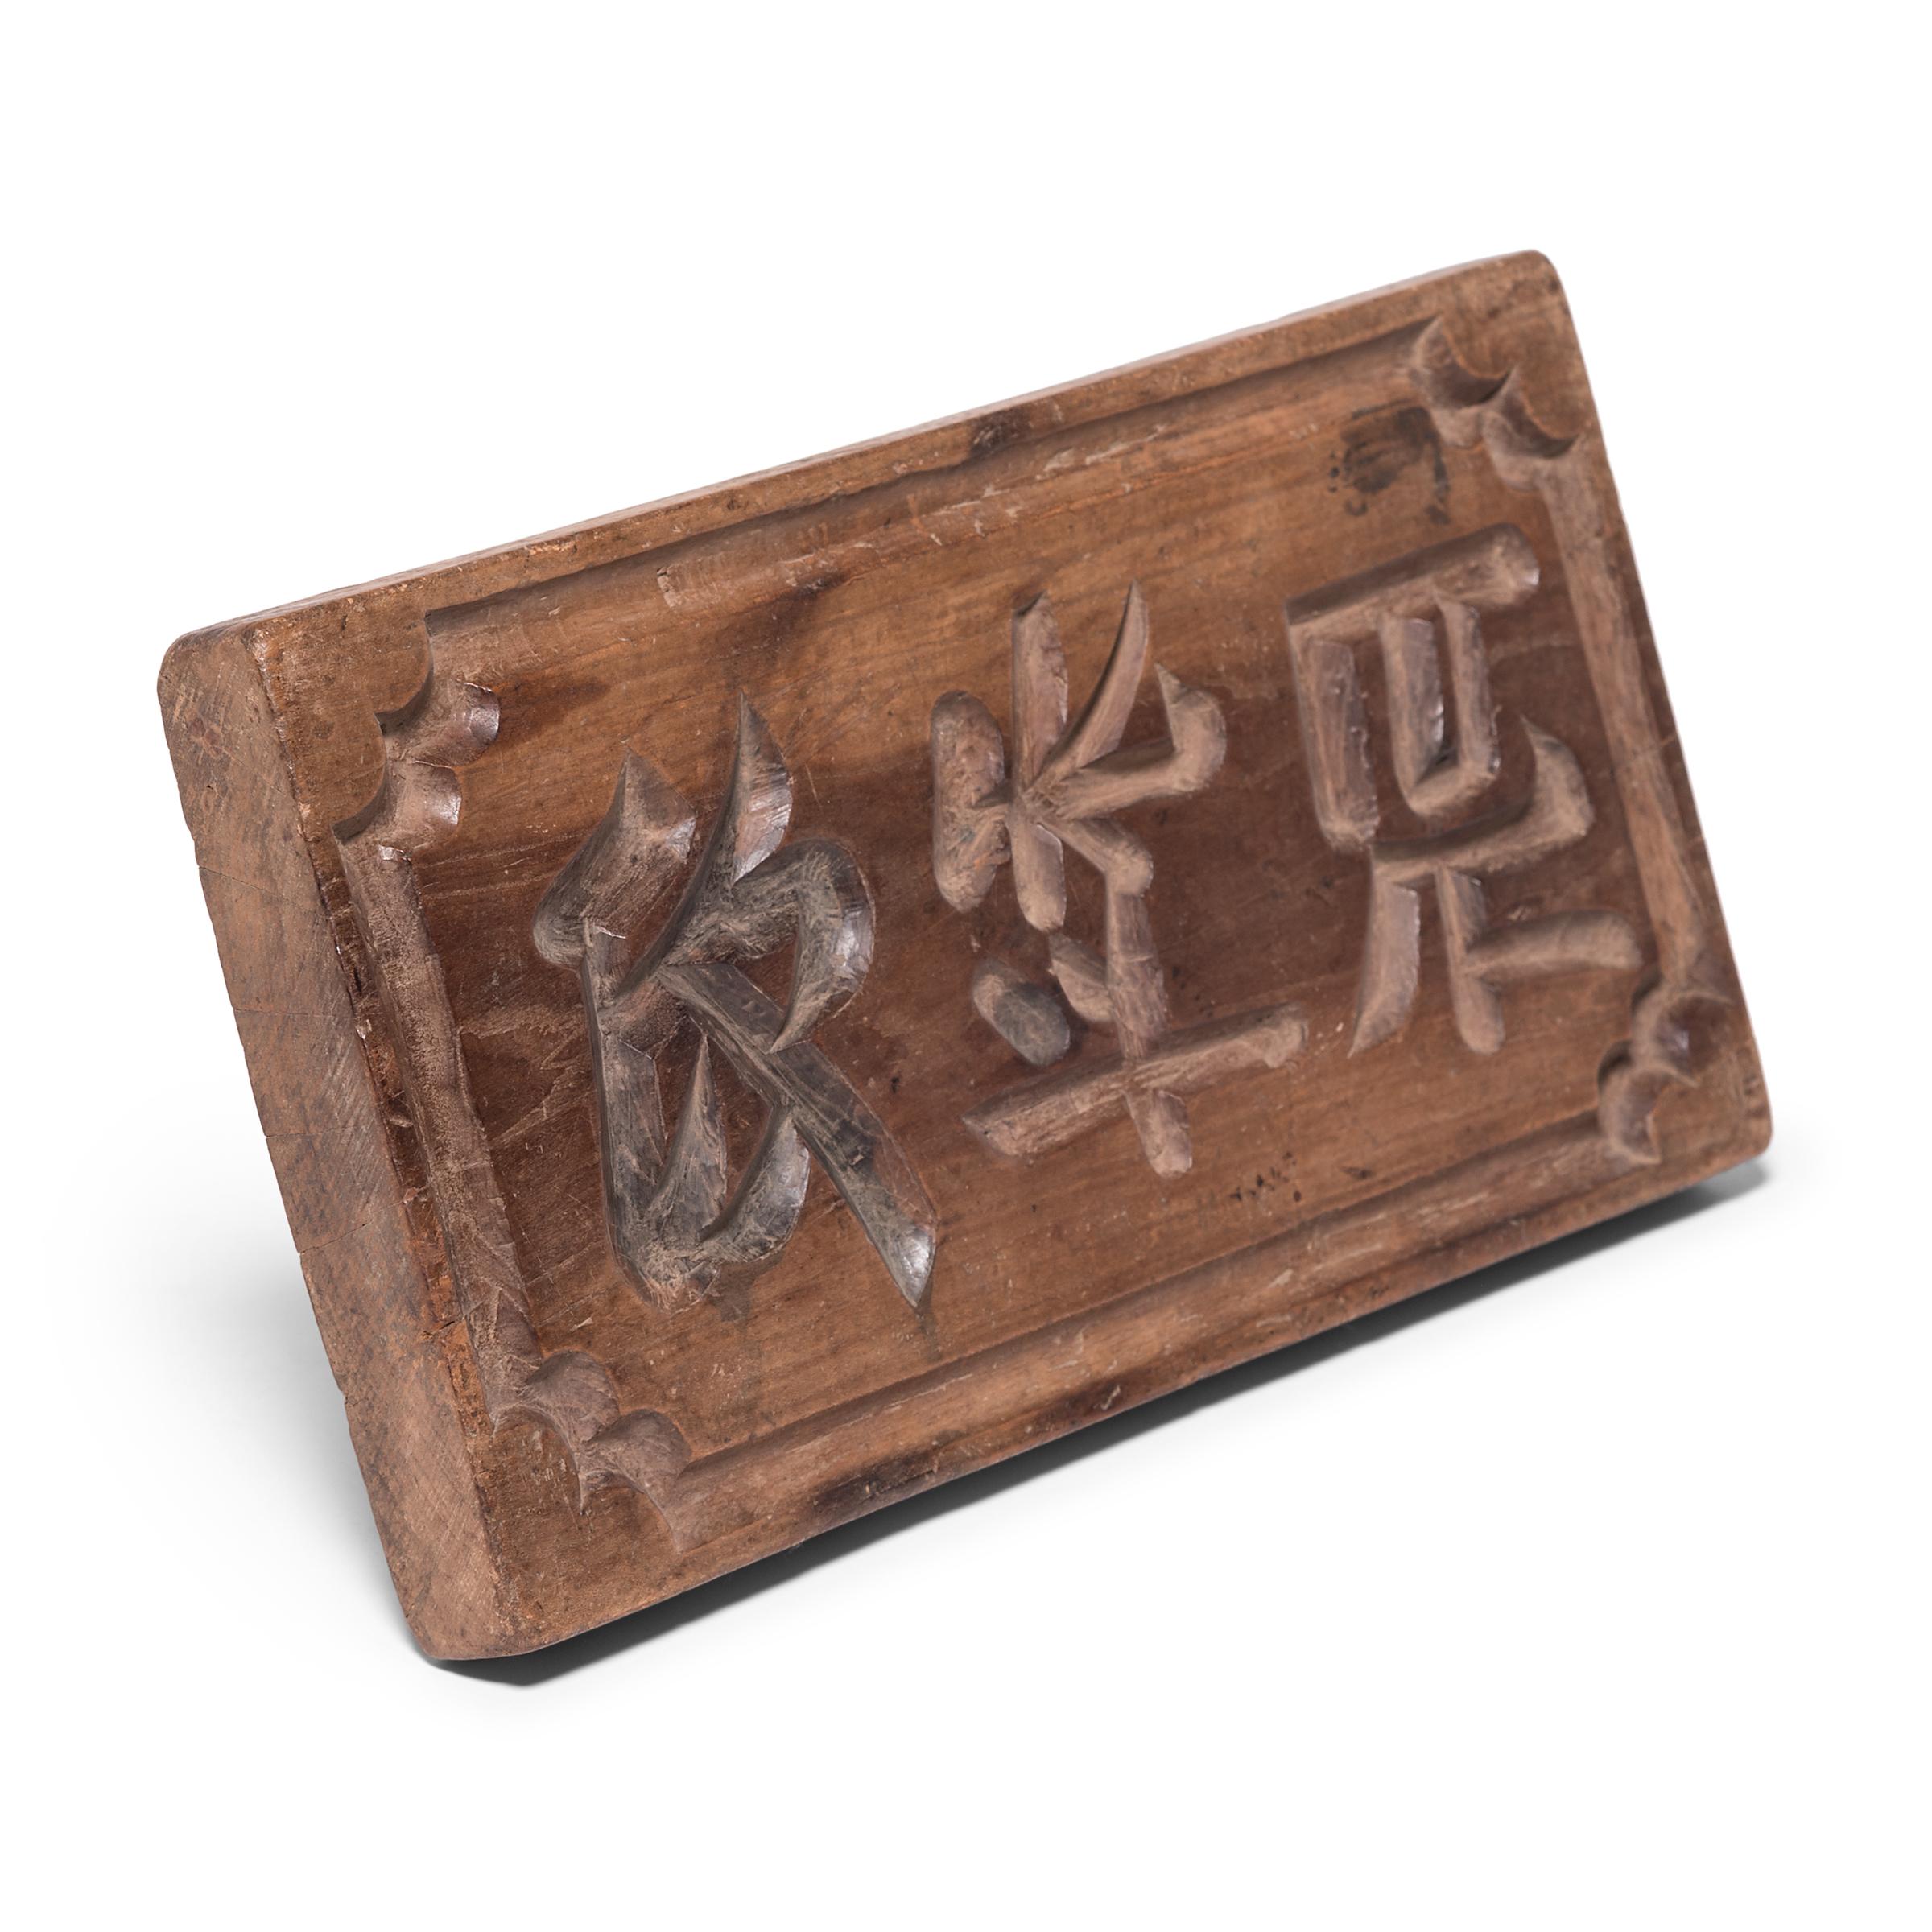 Chinese innovations in ink, block printing and movable type fed the technological push toward expanding the written word's range of influence throughout the world. This printing push evolved out of Chinese Buddhism which embraced woodblock printing